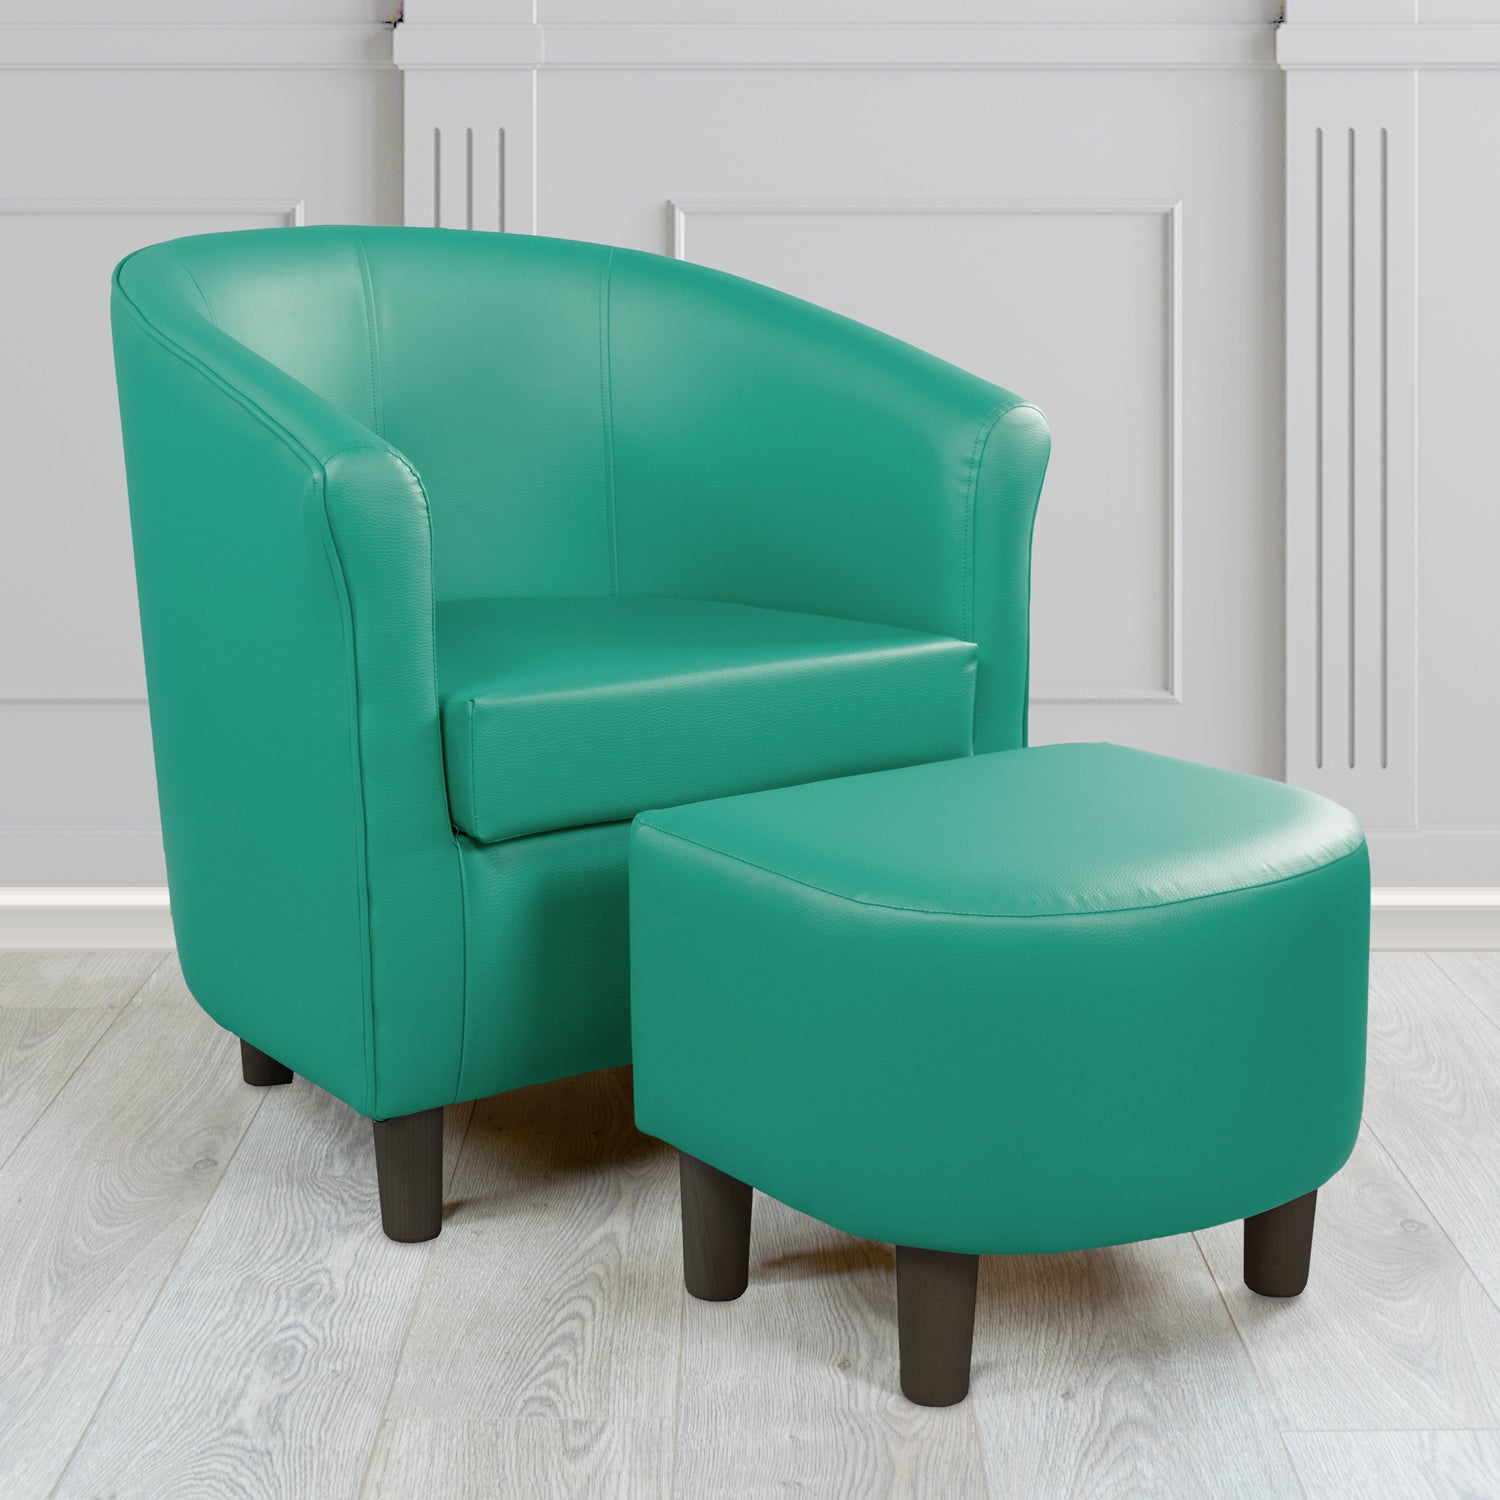 Tuscany Just Colour Sea Green Faux Leather Tub Chair with Footstool Set - The Tub Chair Shop